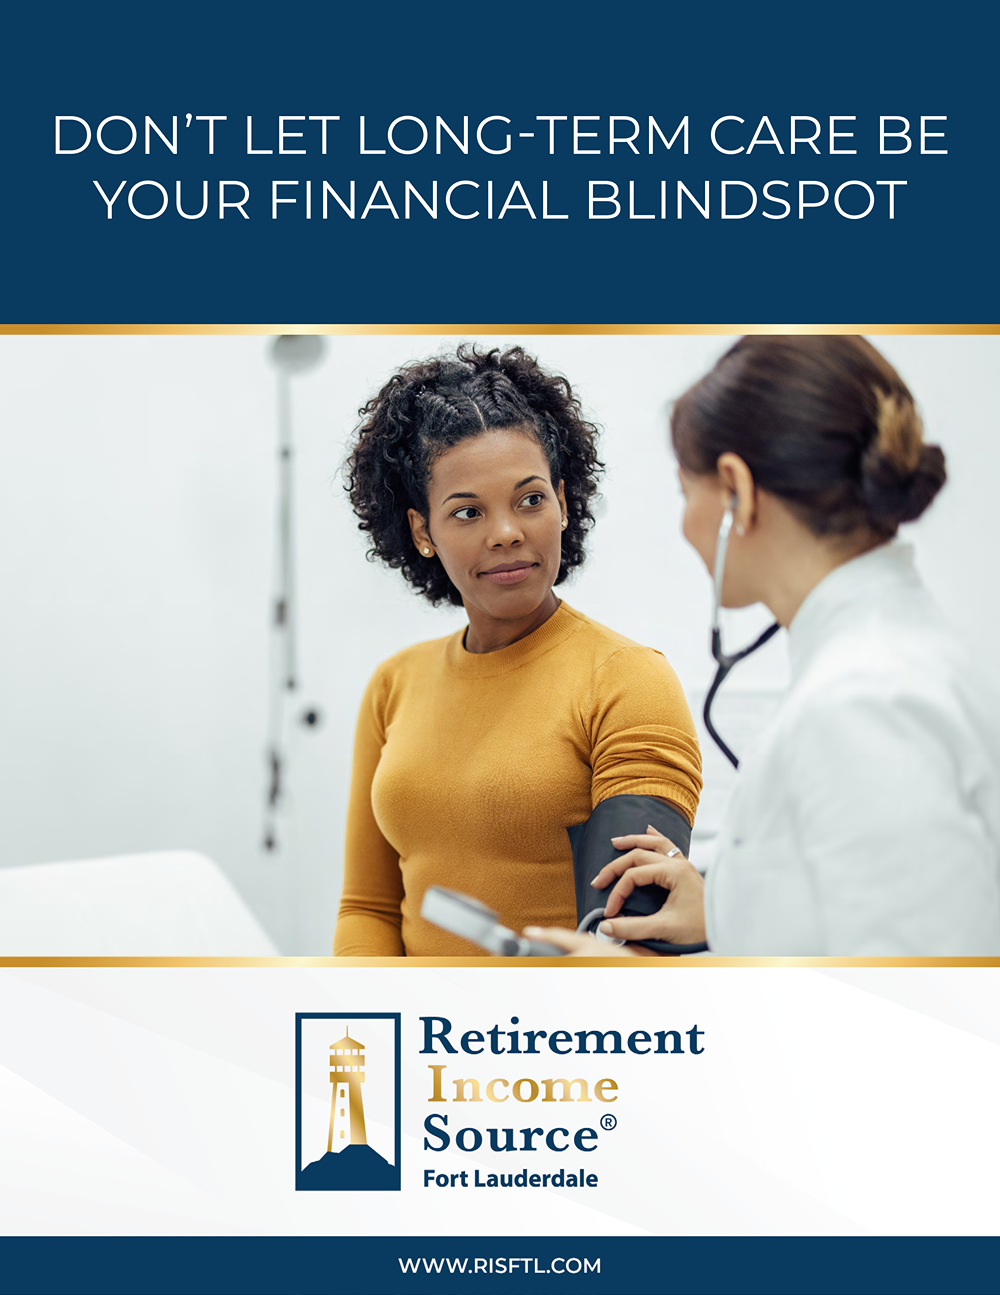 Don’t Let Long-Term Care Be Your Financial Blindspot